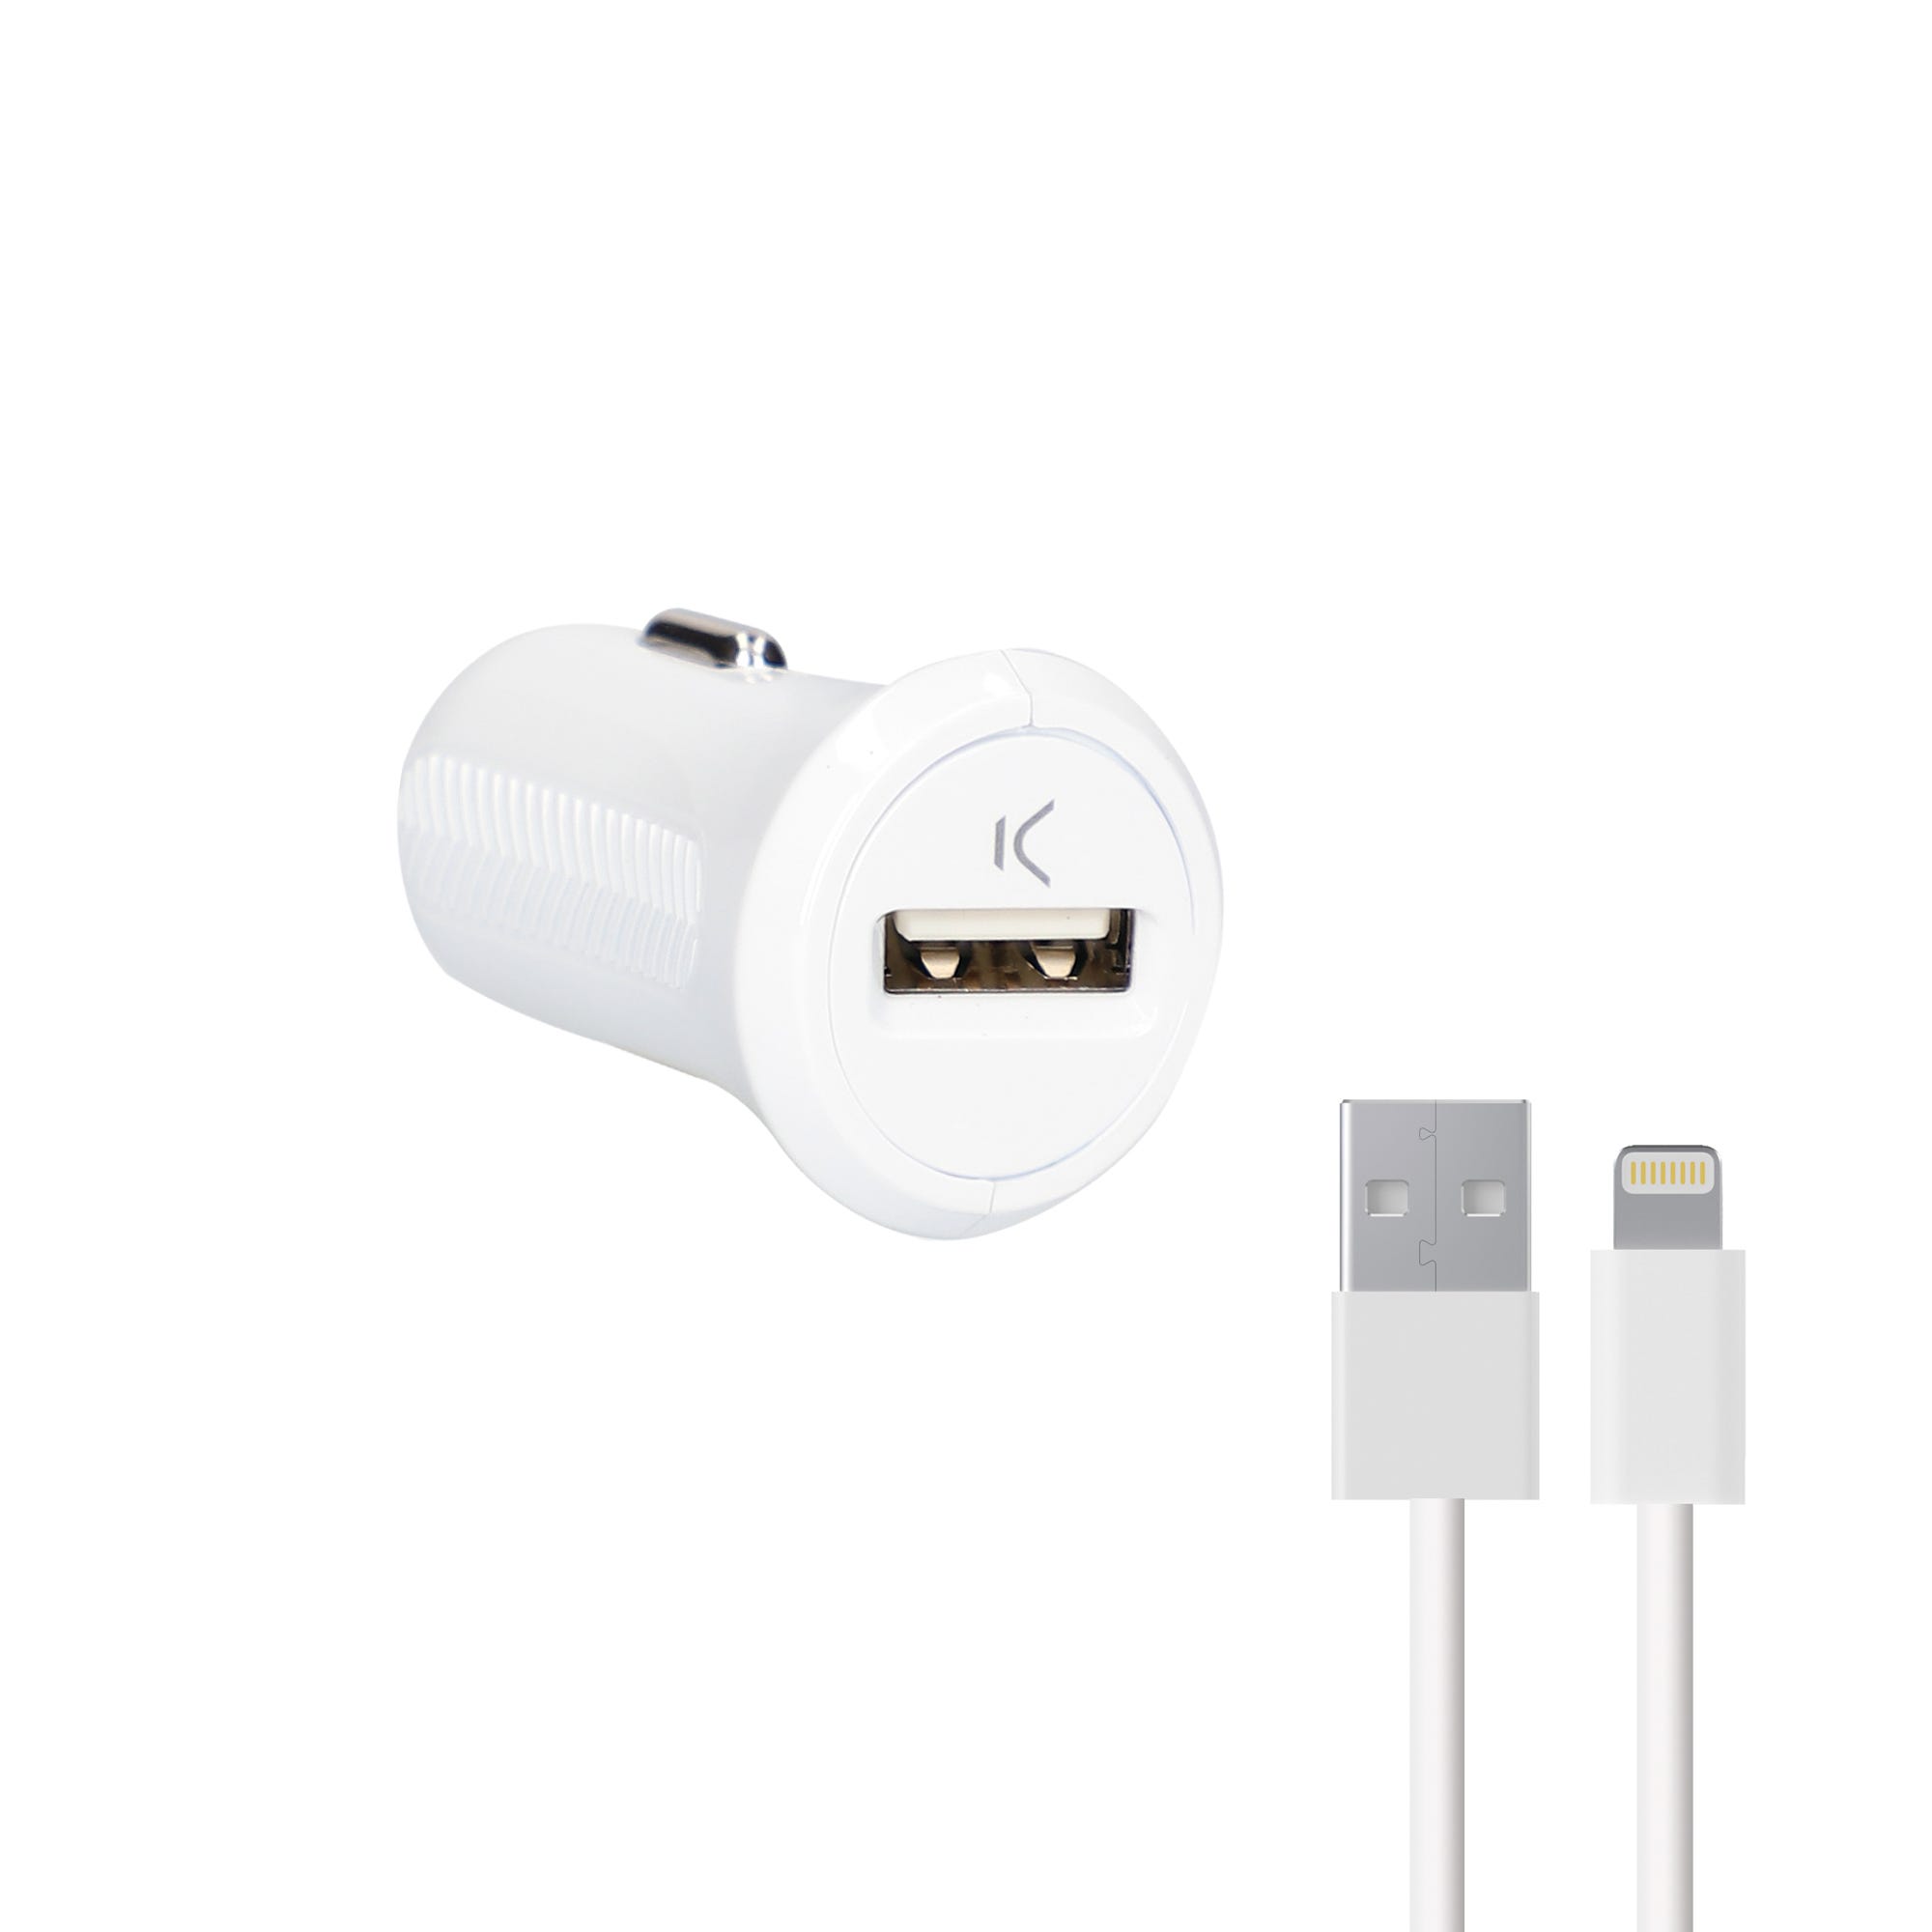 Cargador de coche Ksix, 12W, Made for iPhone + cable Lightning